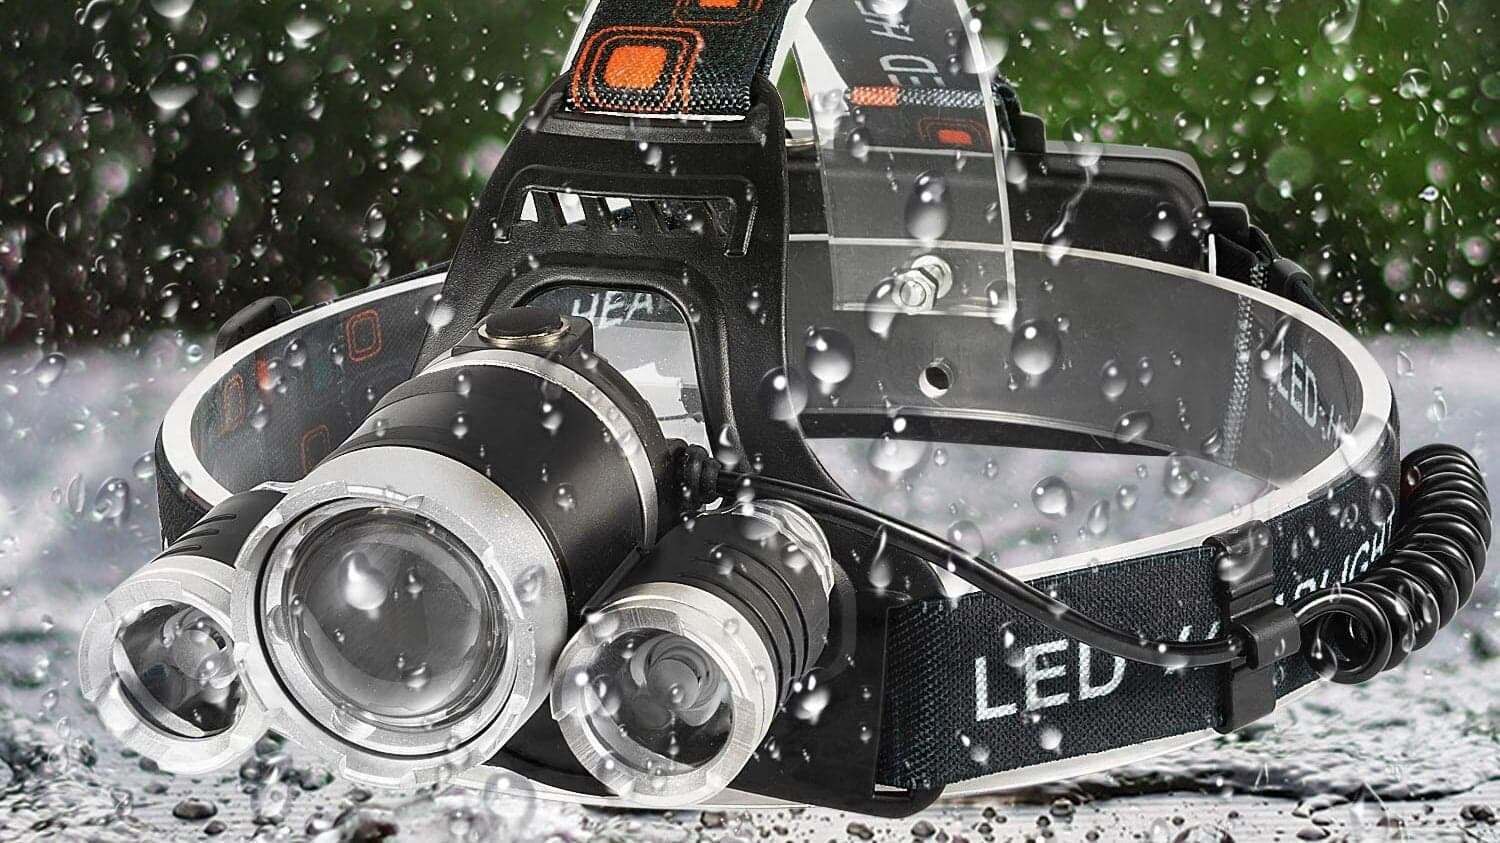 Best Headlamps For Fishing (Review & Buying Guide) in 2022